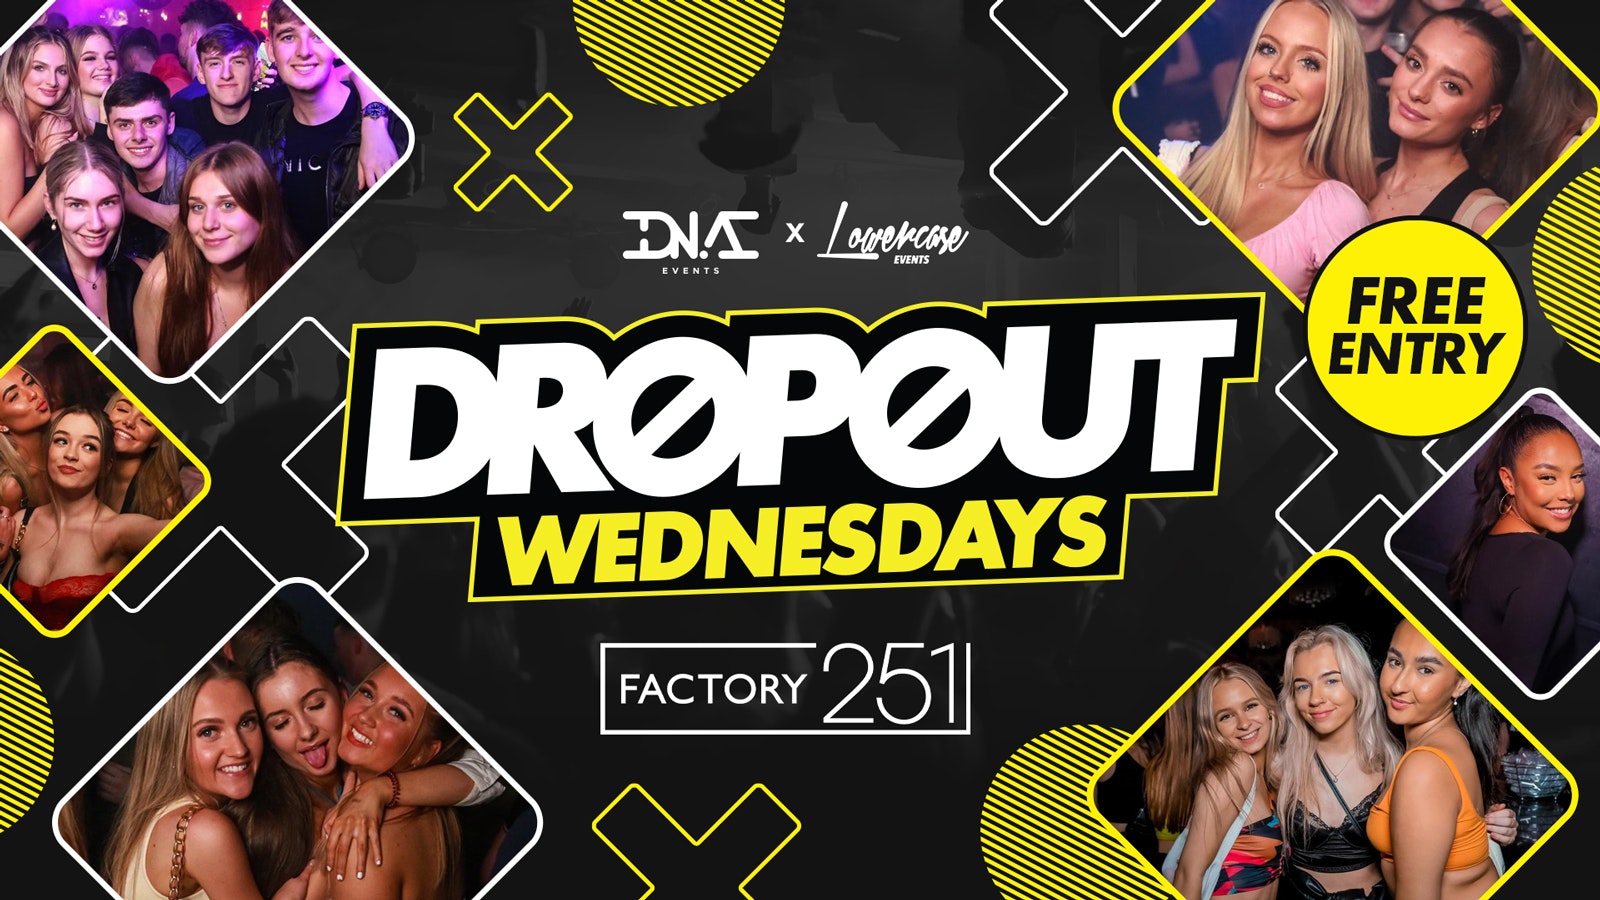 Dropout Wednesdays @ Factory! FREE ENTRY 🎟🍾